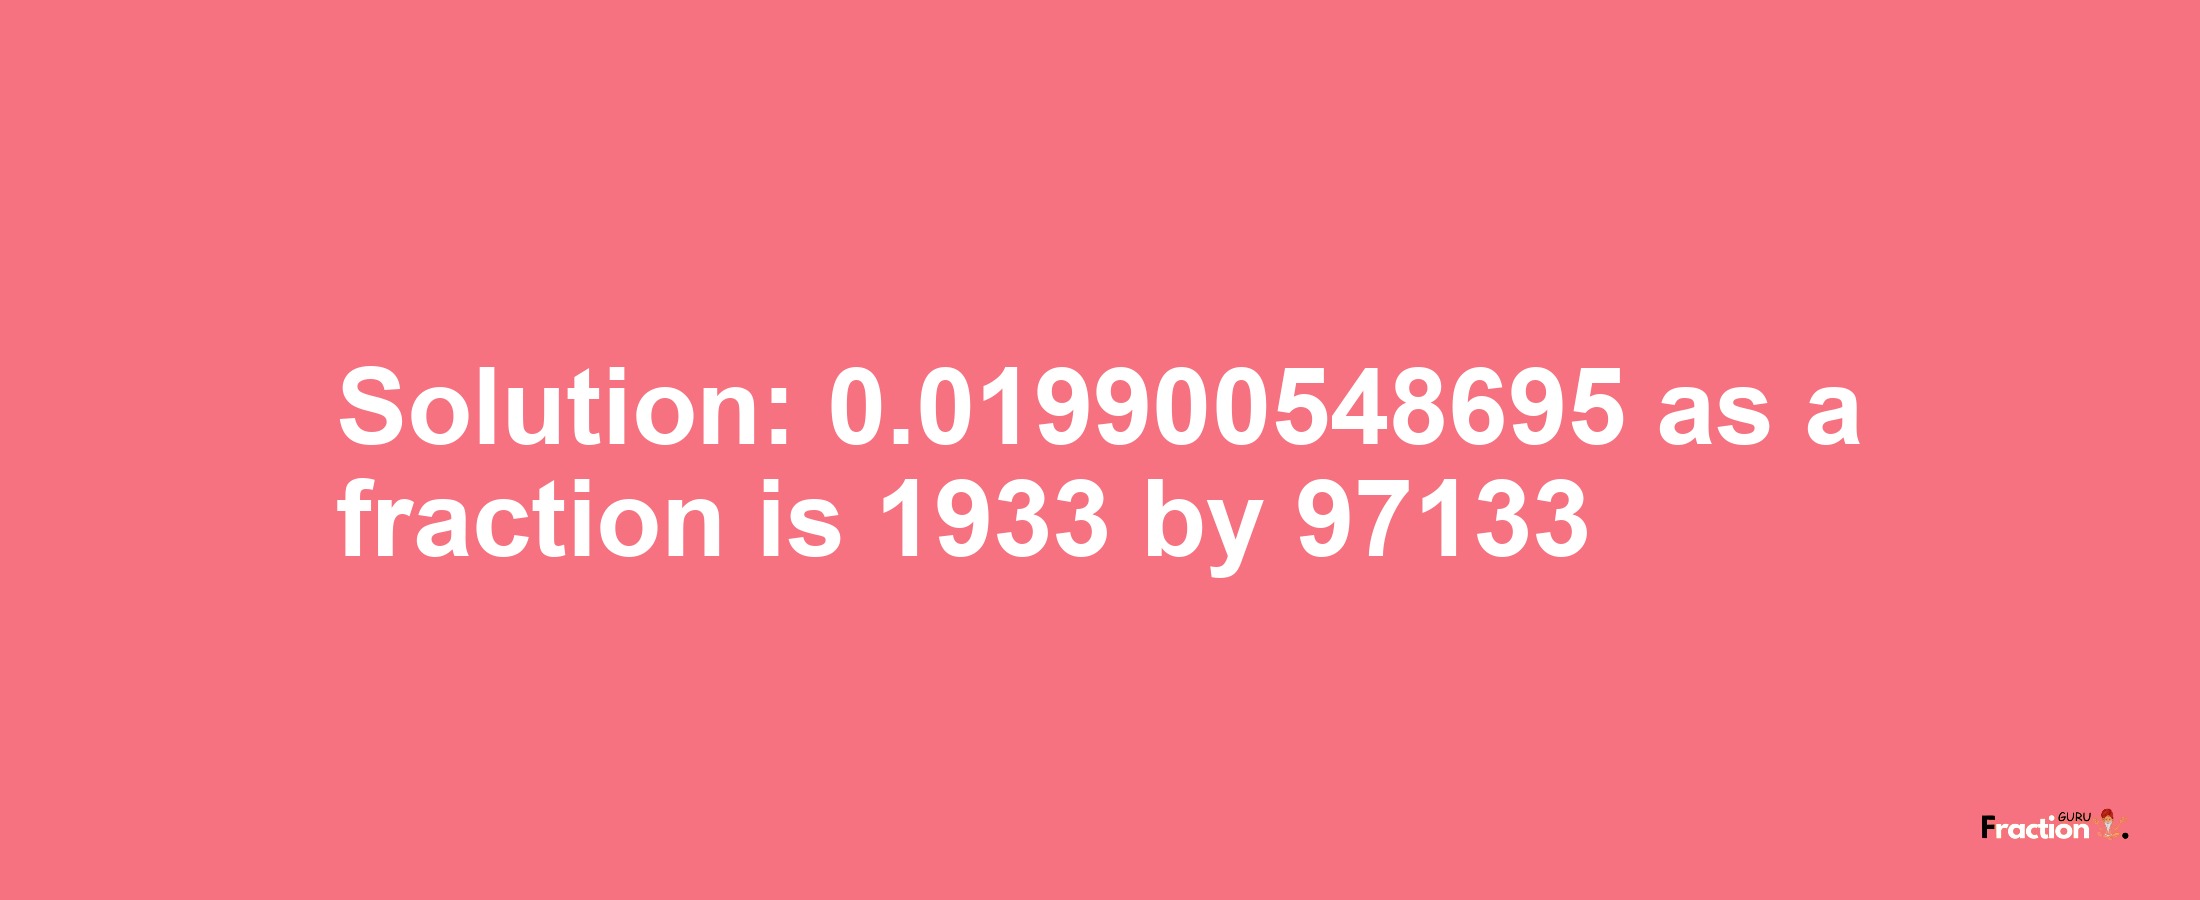 Solution:0.019900548695 as a fraction is 1933/97133